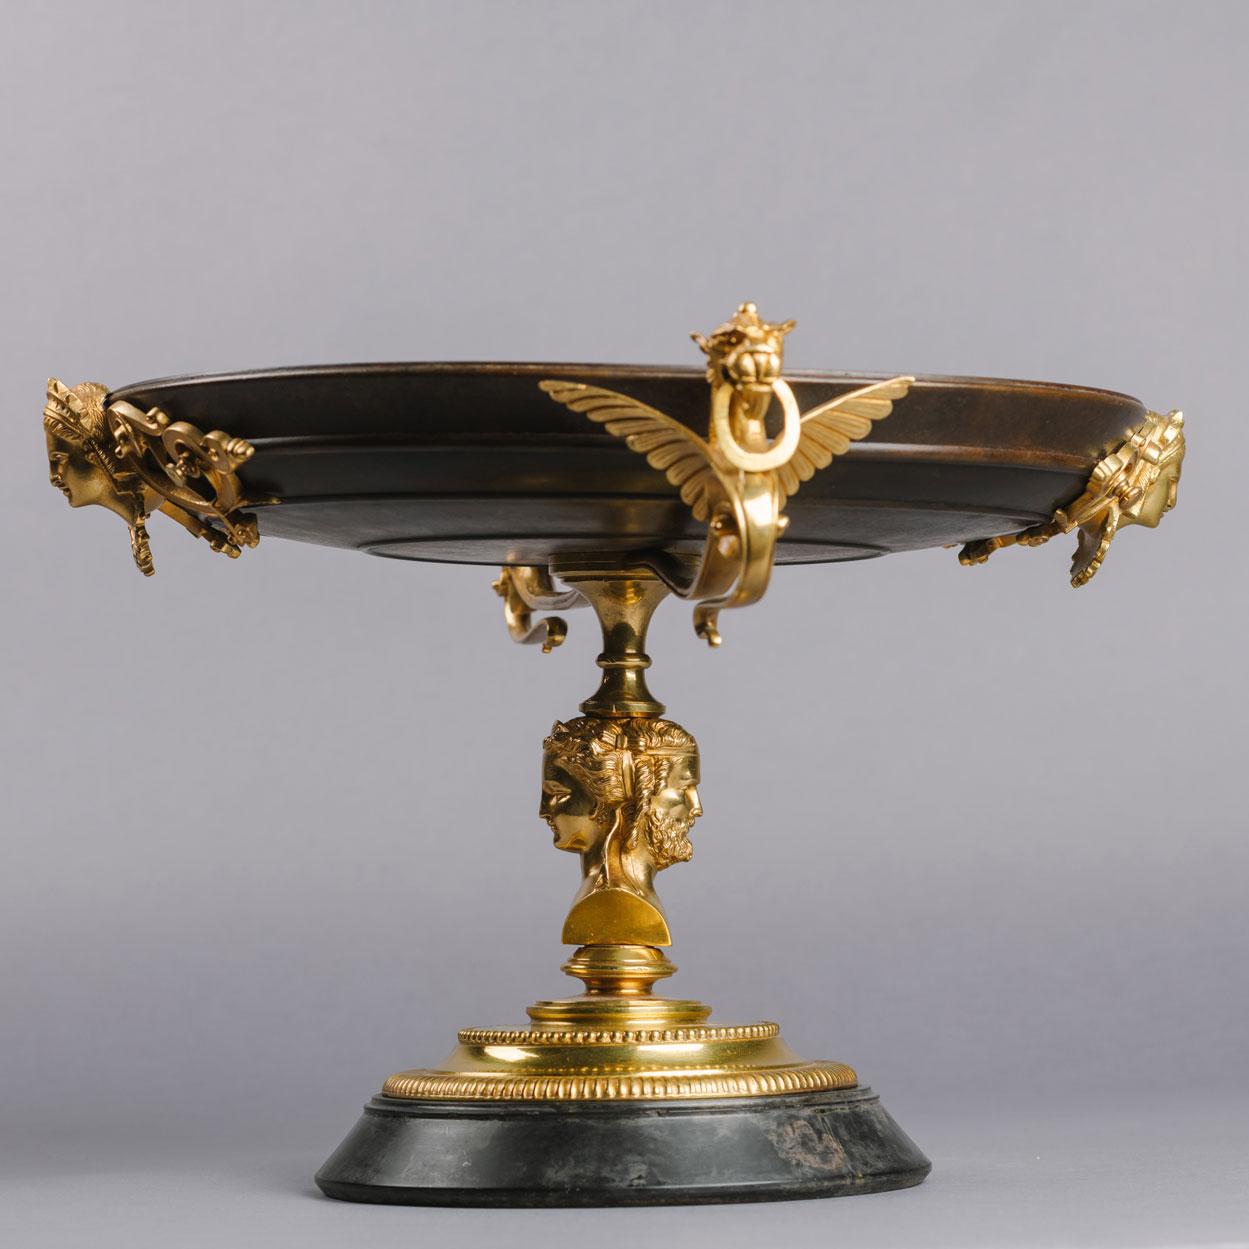 Fine Neoclassical Revival Gilt and Patinated Bronze Tazza For Sale 1